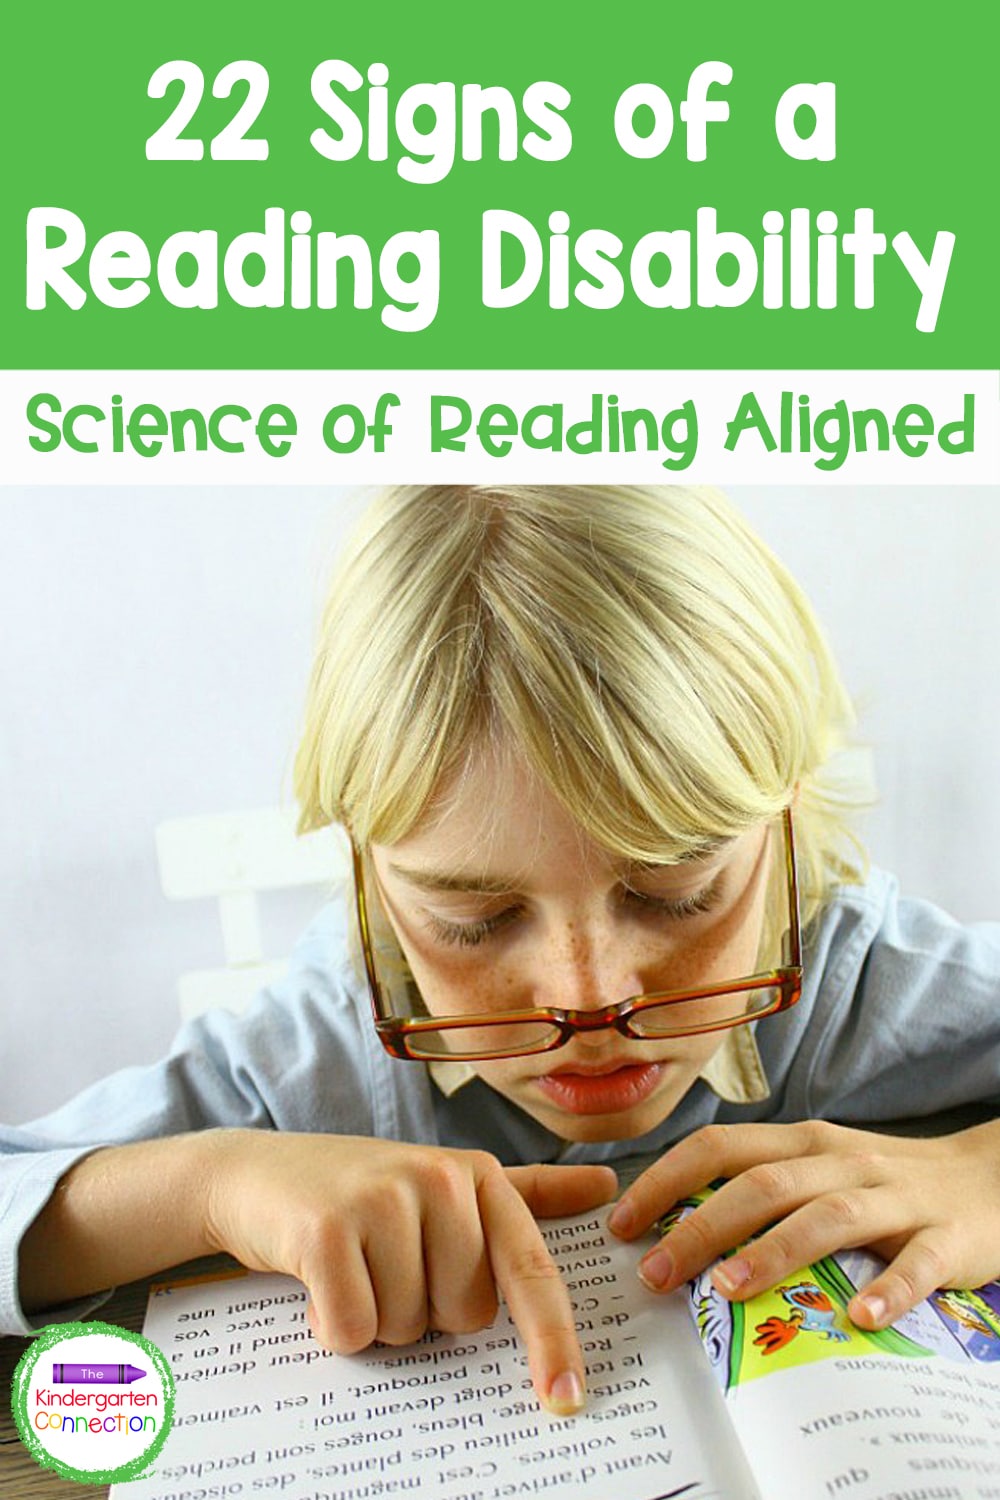 As a child learns to read there may be some struggles and it is helpful for teachers to know these 22 telltale signs of a reading disability.